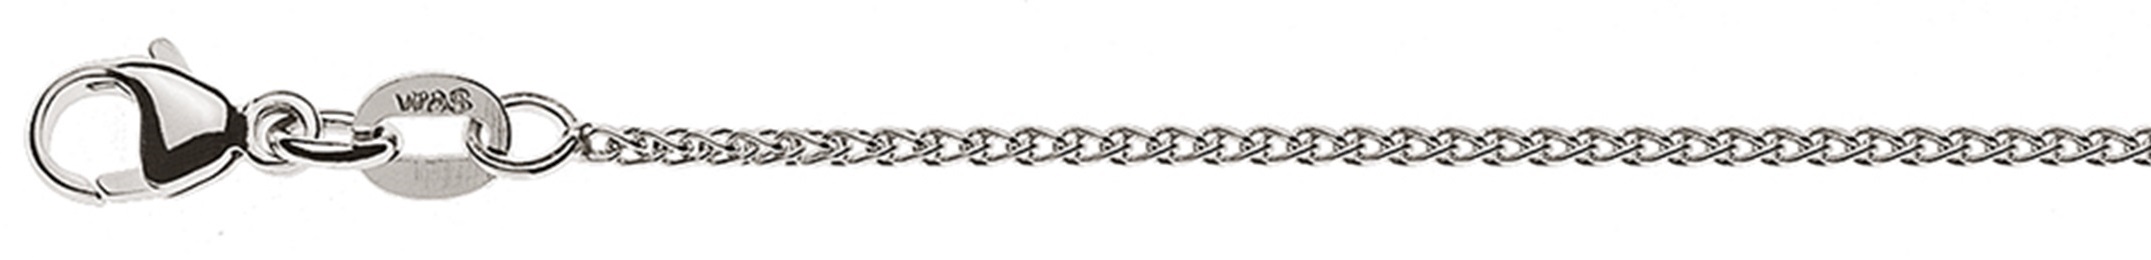 AURONOS Style Necklace white gold 9K cable chain 38cm 1.2mm